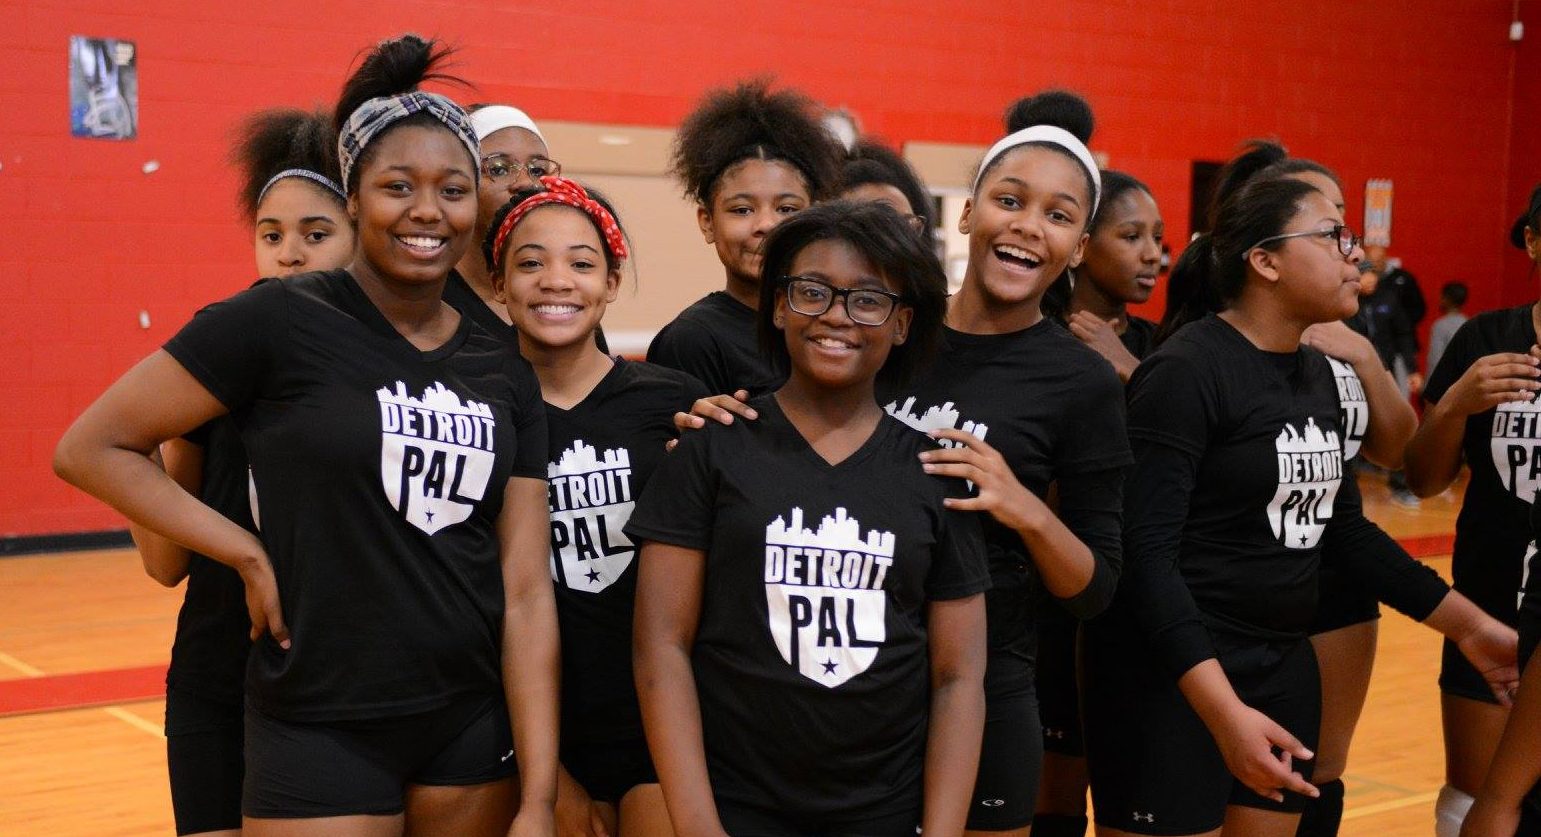 Sports Detroit PAL Building Character in Young People